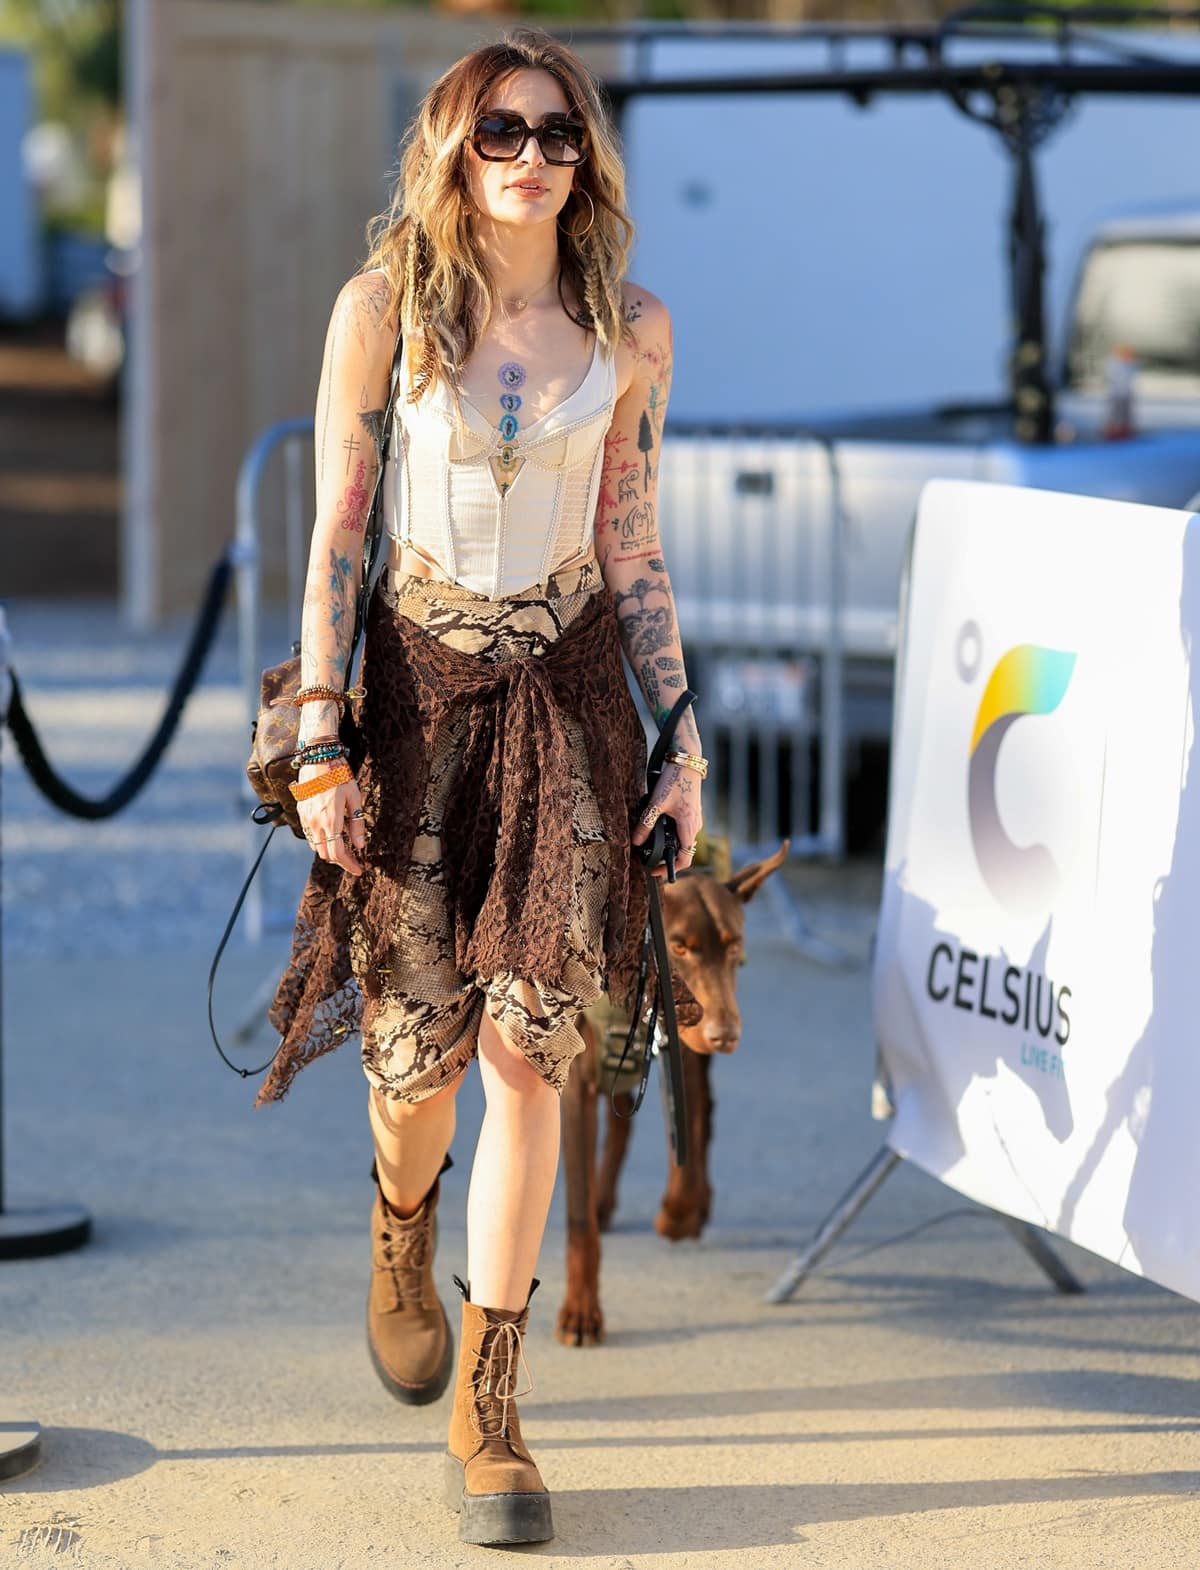 Paris Jackson showcased her signature blend of grunge and bohemian styles in a cream-colored structured corset top with see-through paneling paired with a high-waisted snakeskin-print skirt at the Celsius Coachella party